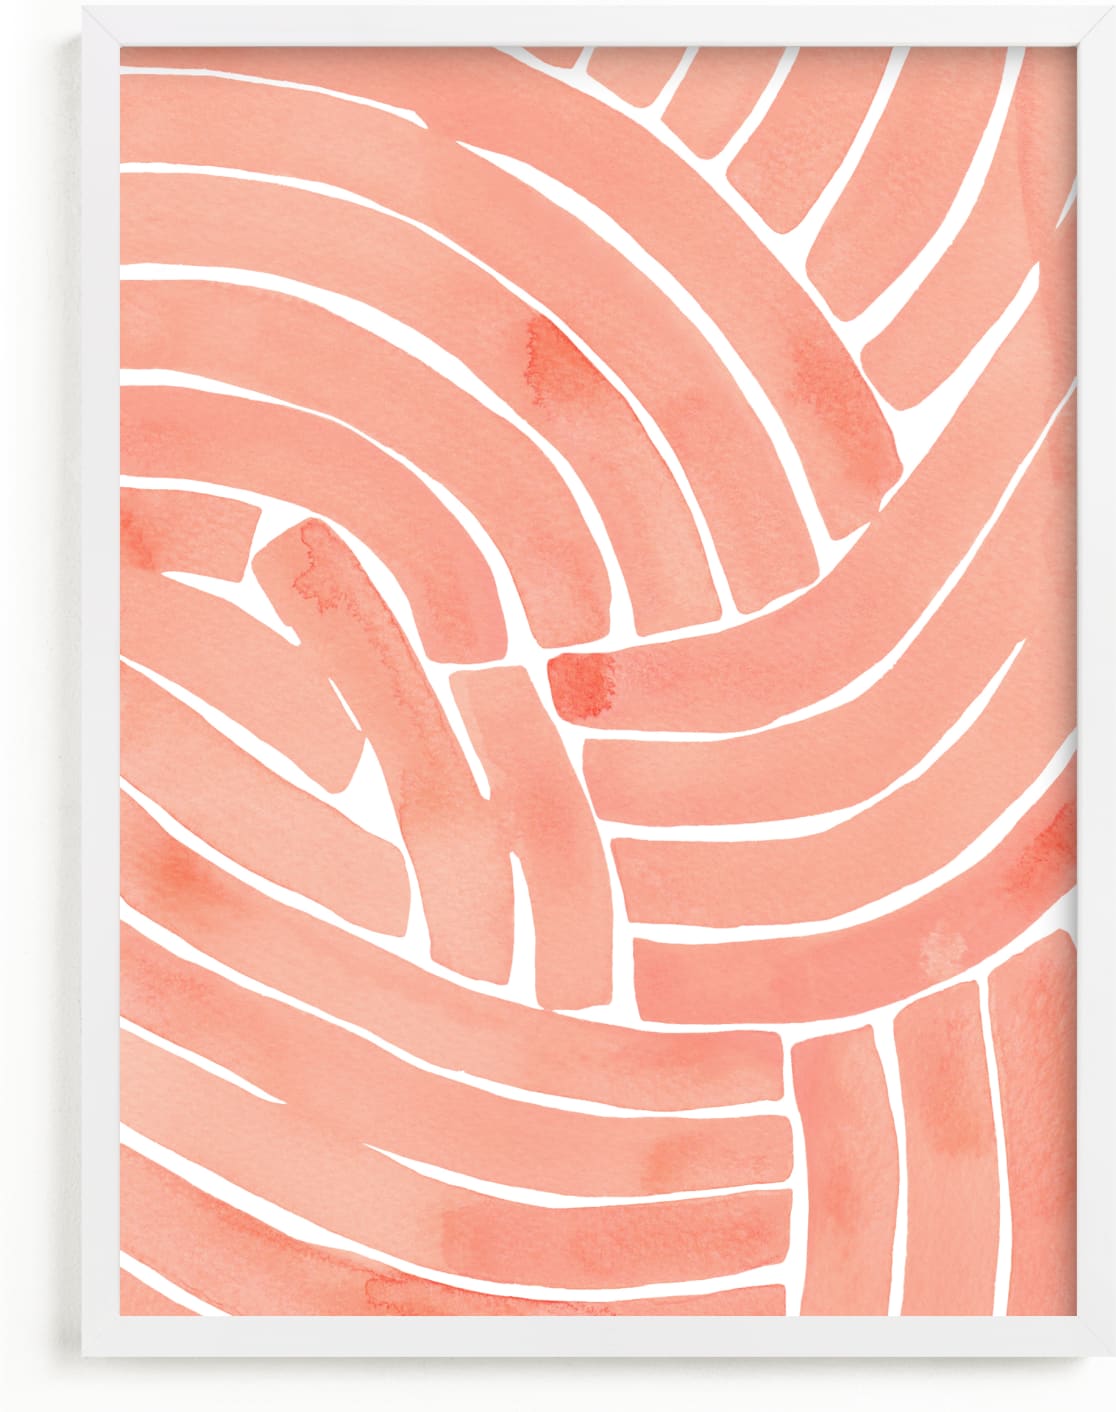 This is a white, pink, orange art by Kristine Sarley called Curvy lines.